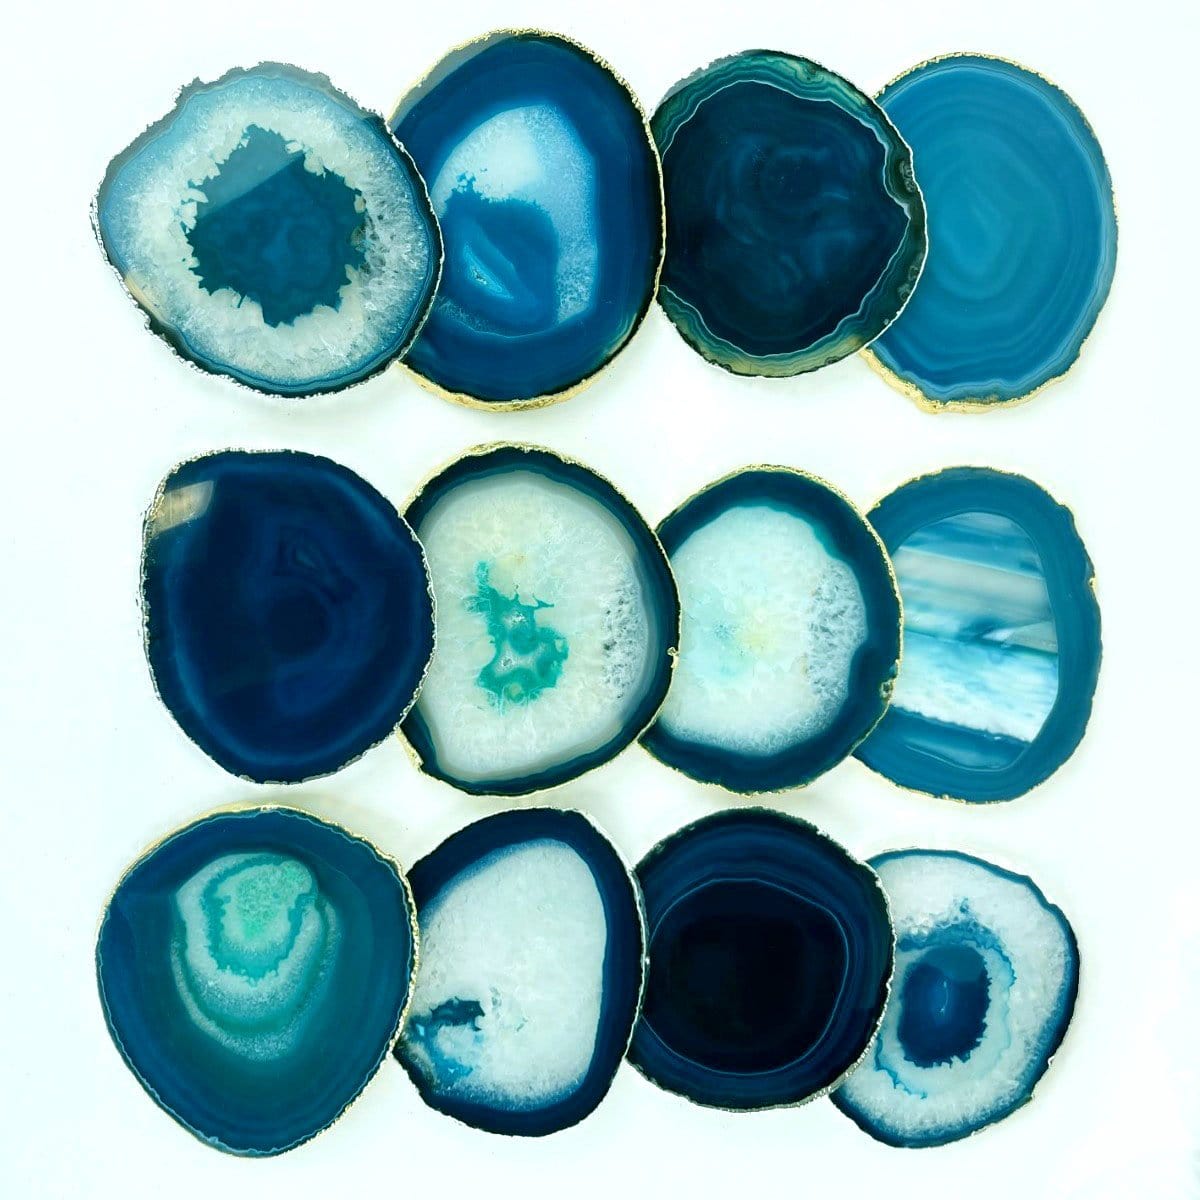 12 Teal Agate coasters with a silver / gold electroplated edge, Slices measure about 3.5-5"